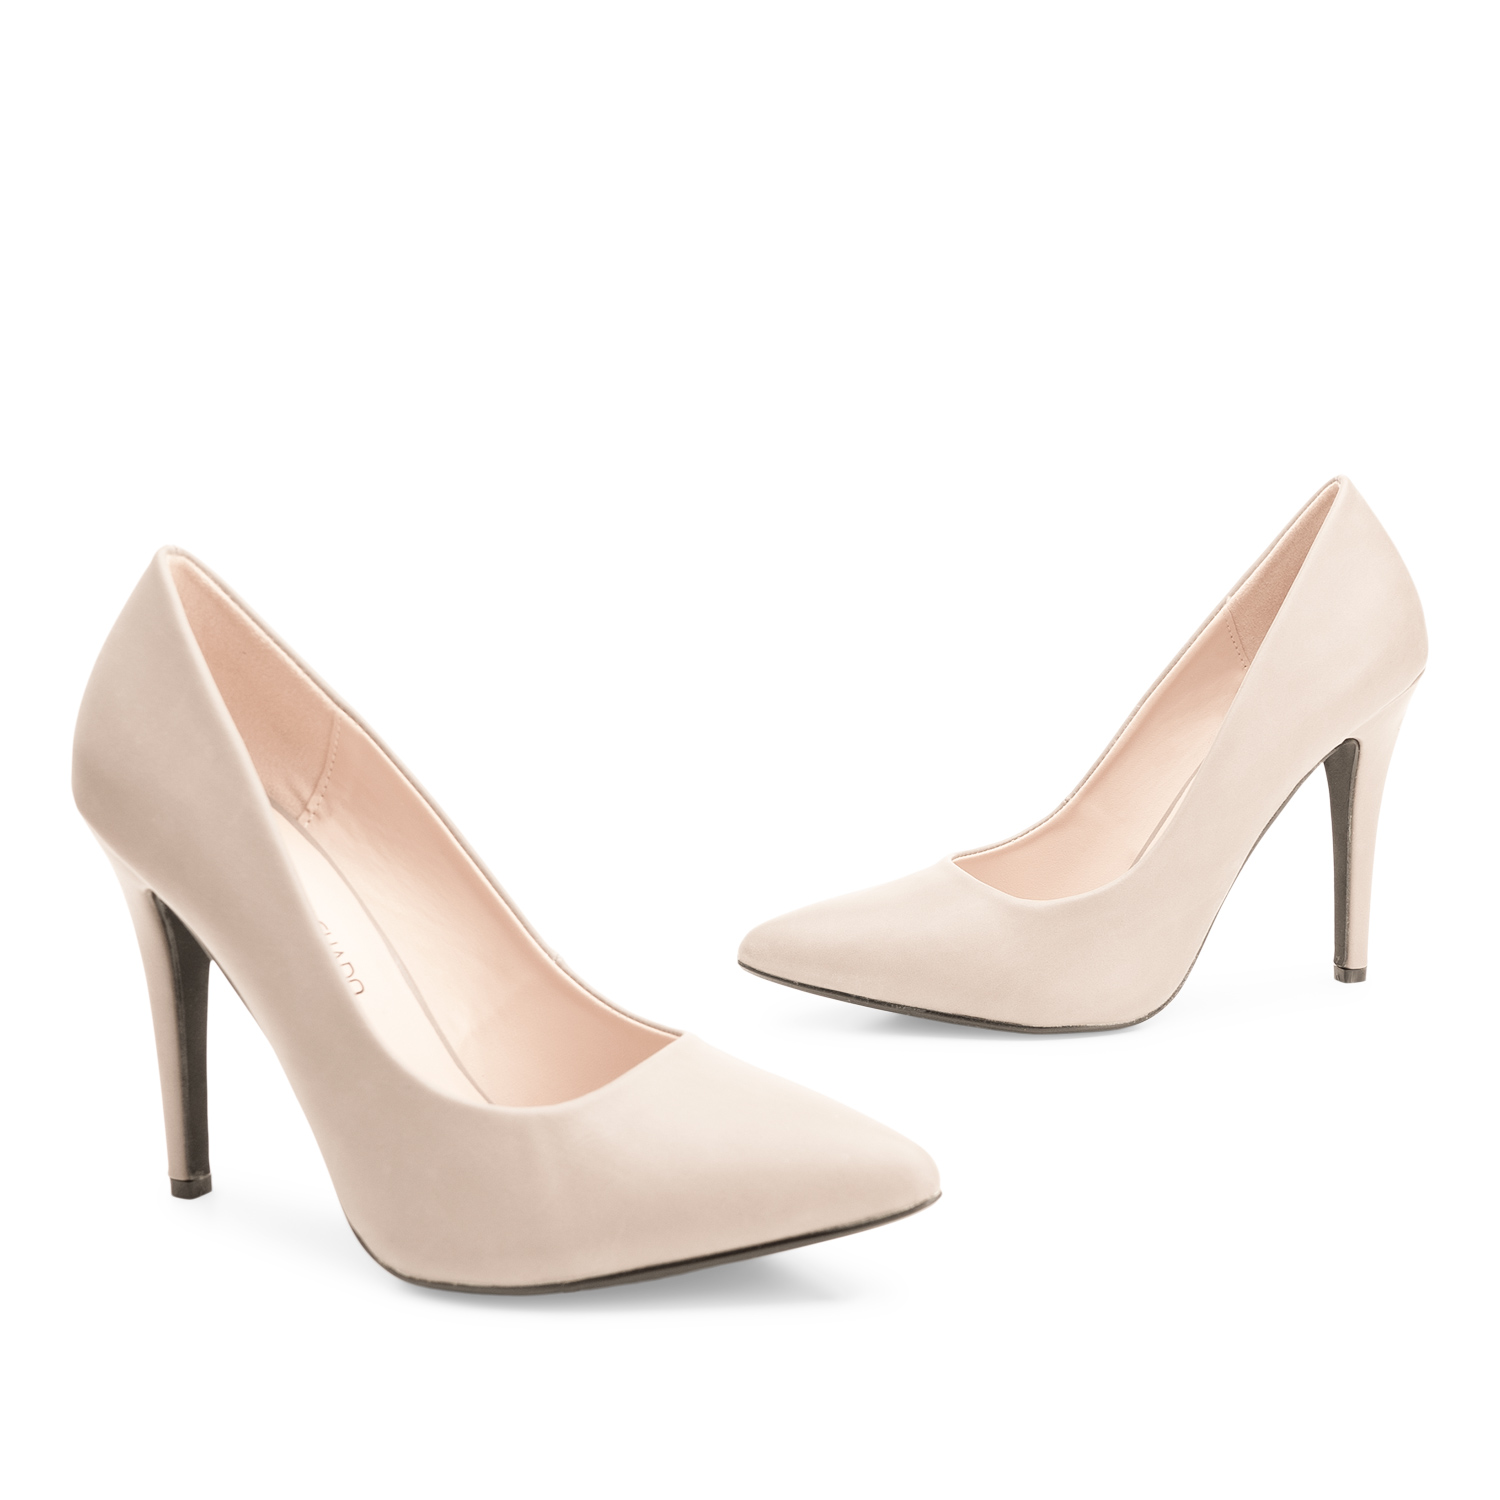 Heeled shoes in off-white faux leather 